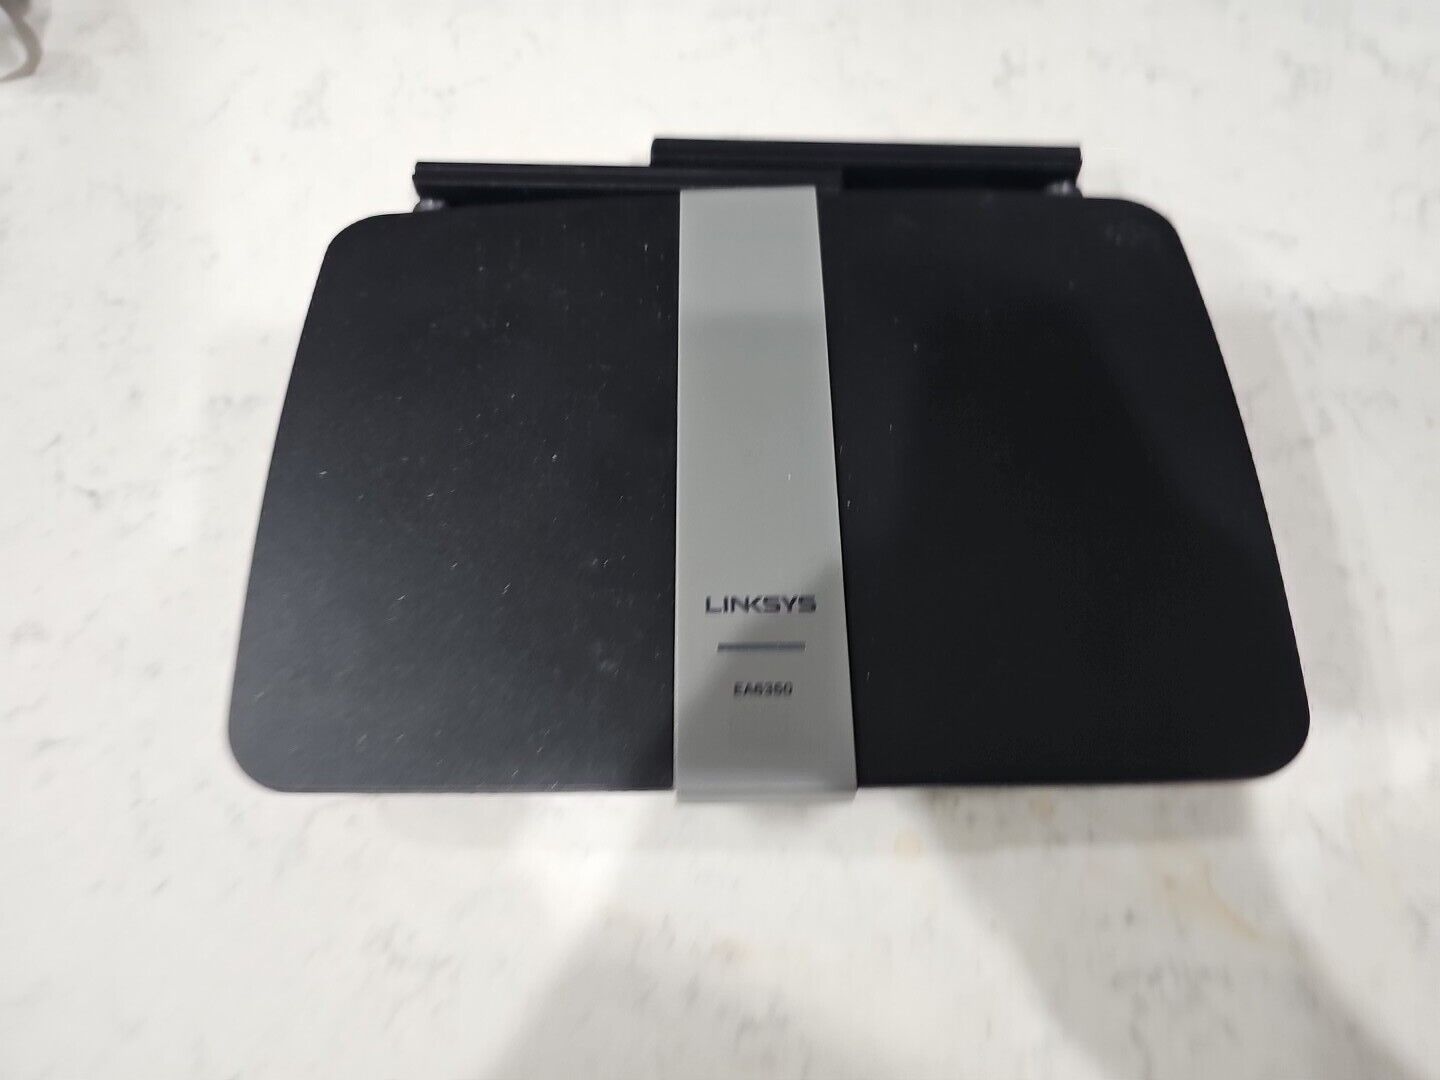 Linksys EA6350 867 Mbps 4 Port 300 Mbps Wireless Router - No Power Cord